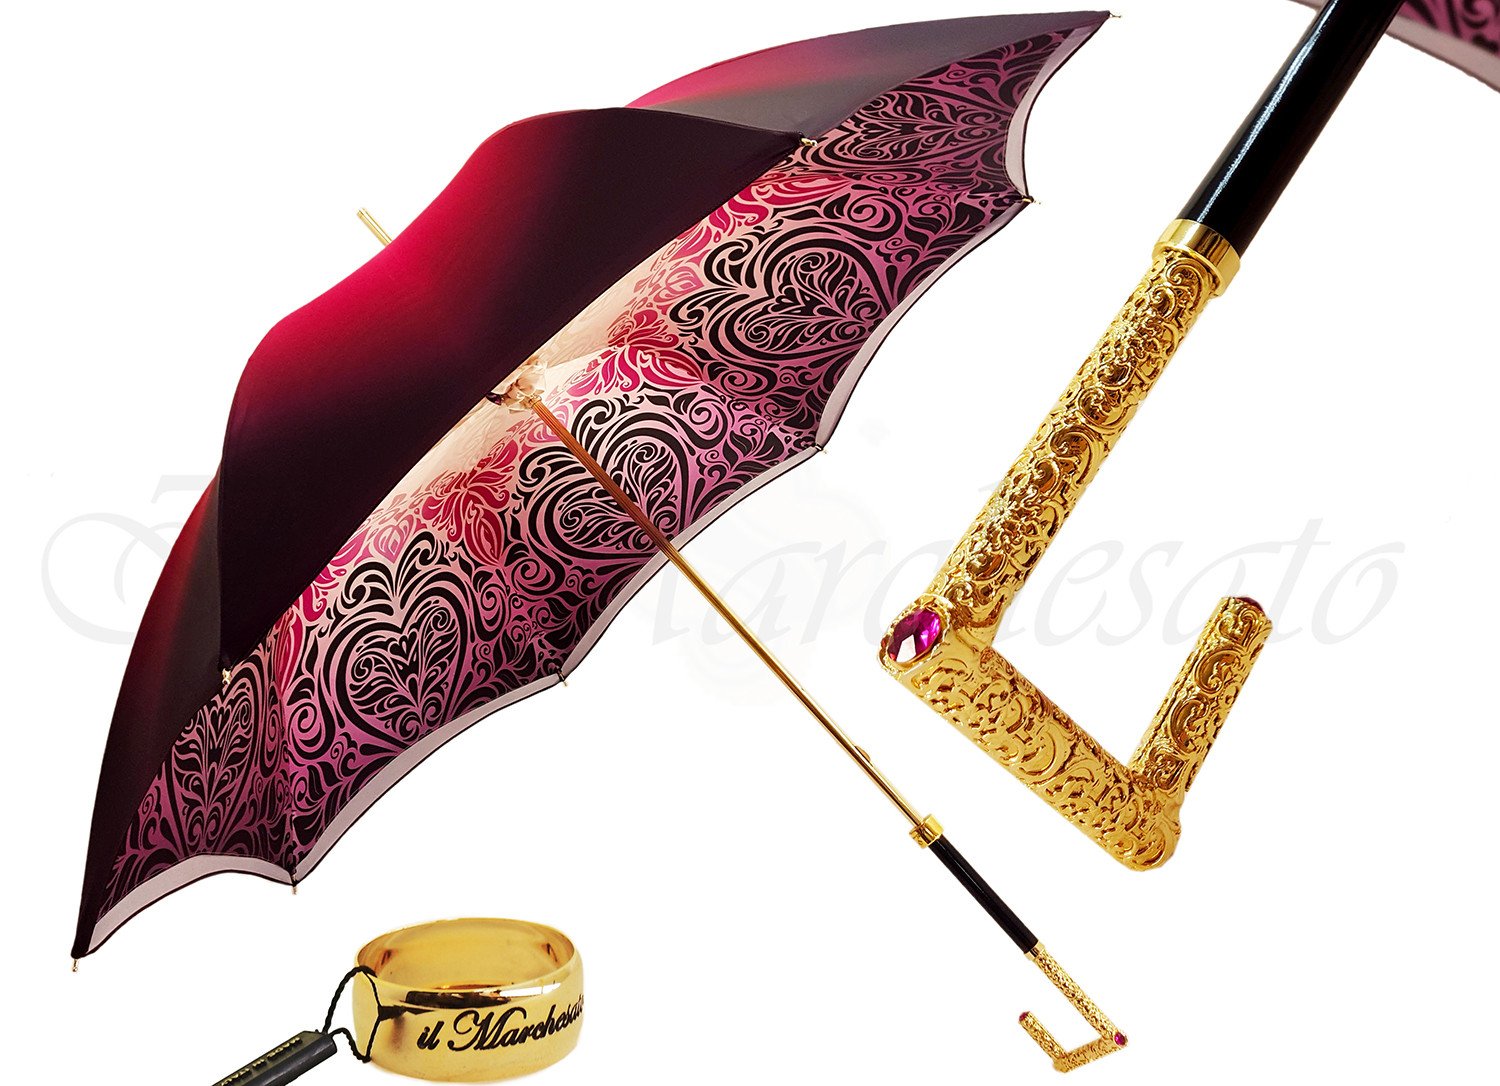 Beautifull Double Canopy Umbrella Finished in a Luxurious Colored Satin Polyester Fabric - il-marchesato